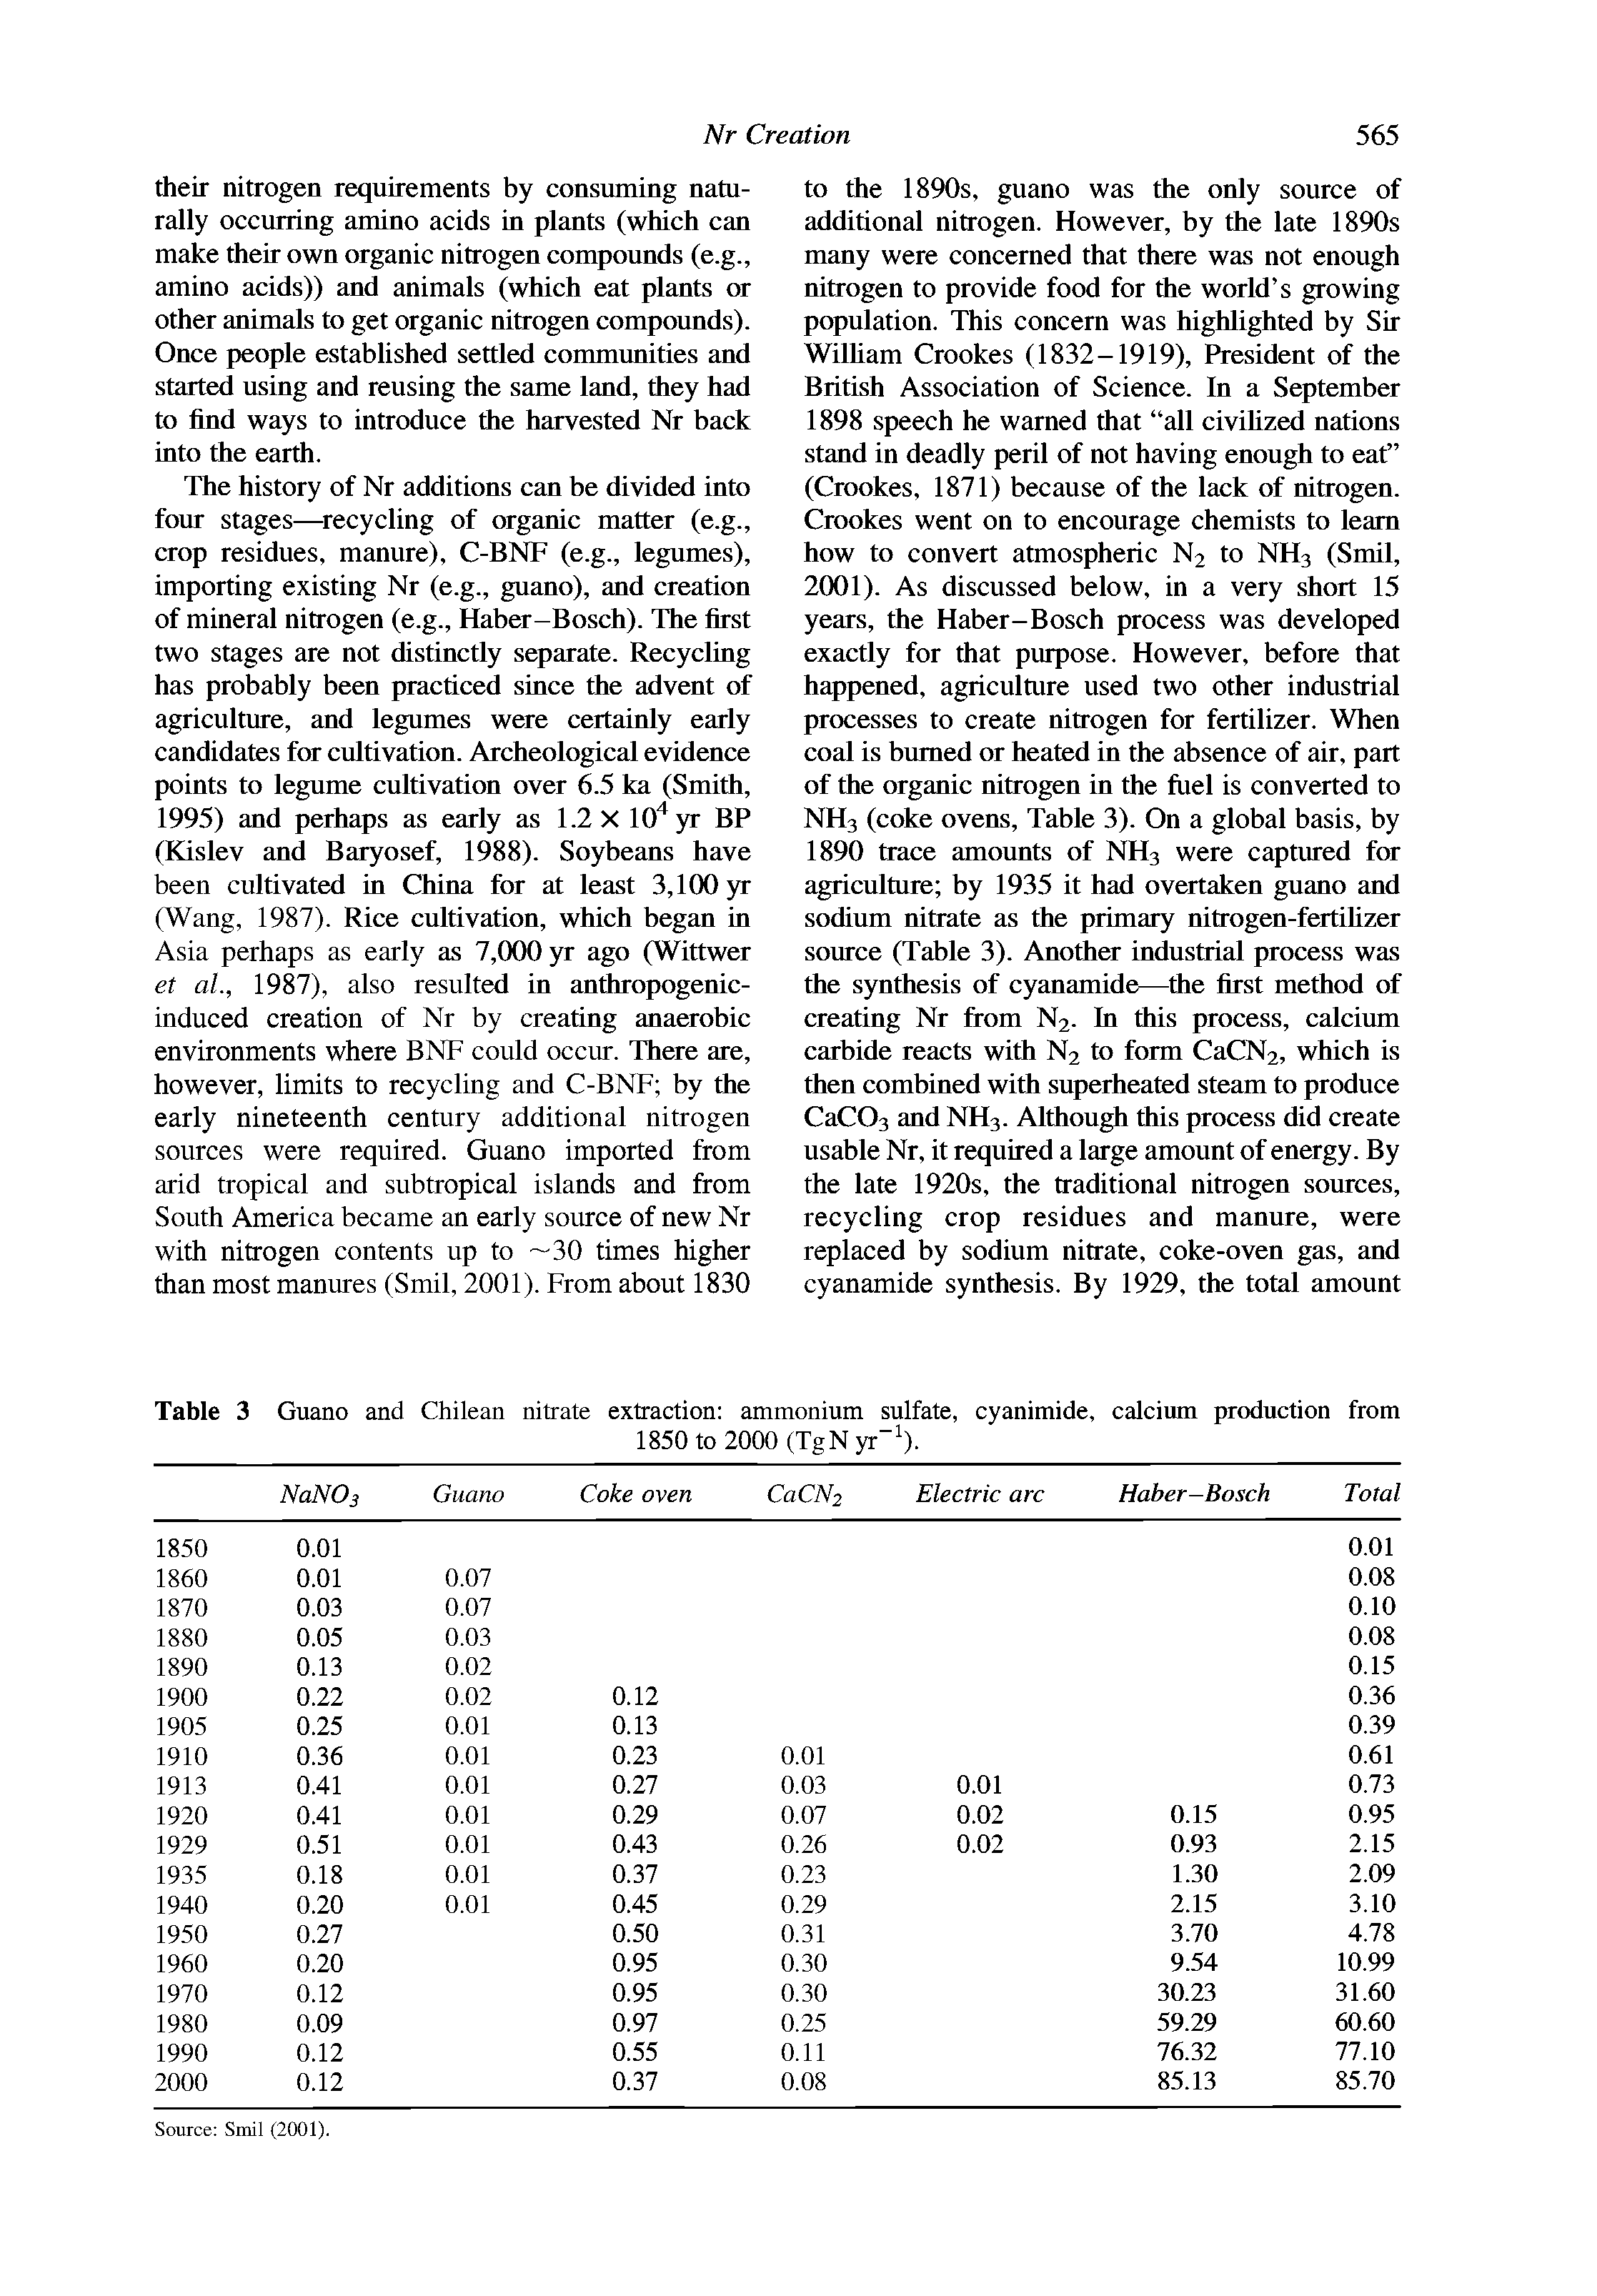 Table 3 Guano and Chilean nitrate extraction ammonium 1850 to 2000 (TgN yr sulfate, cyanimide, calcium production from...